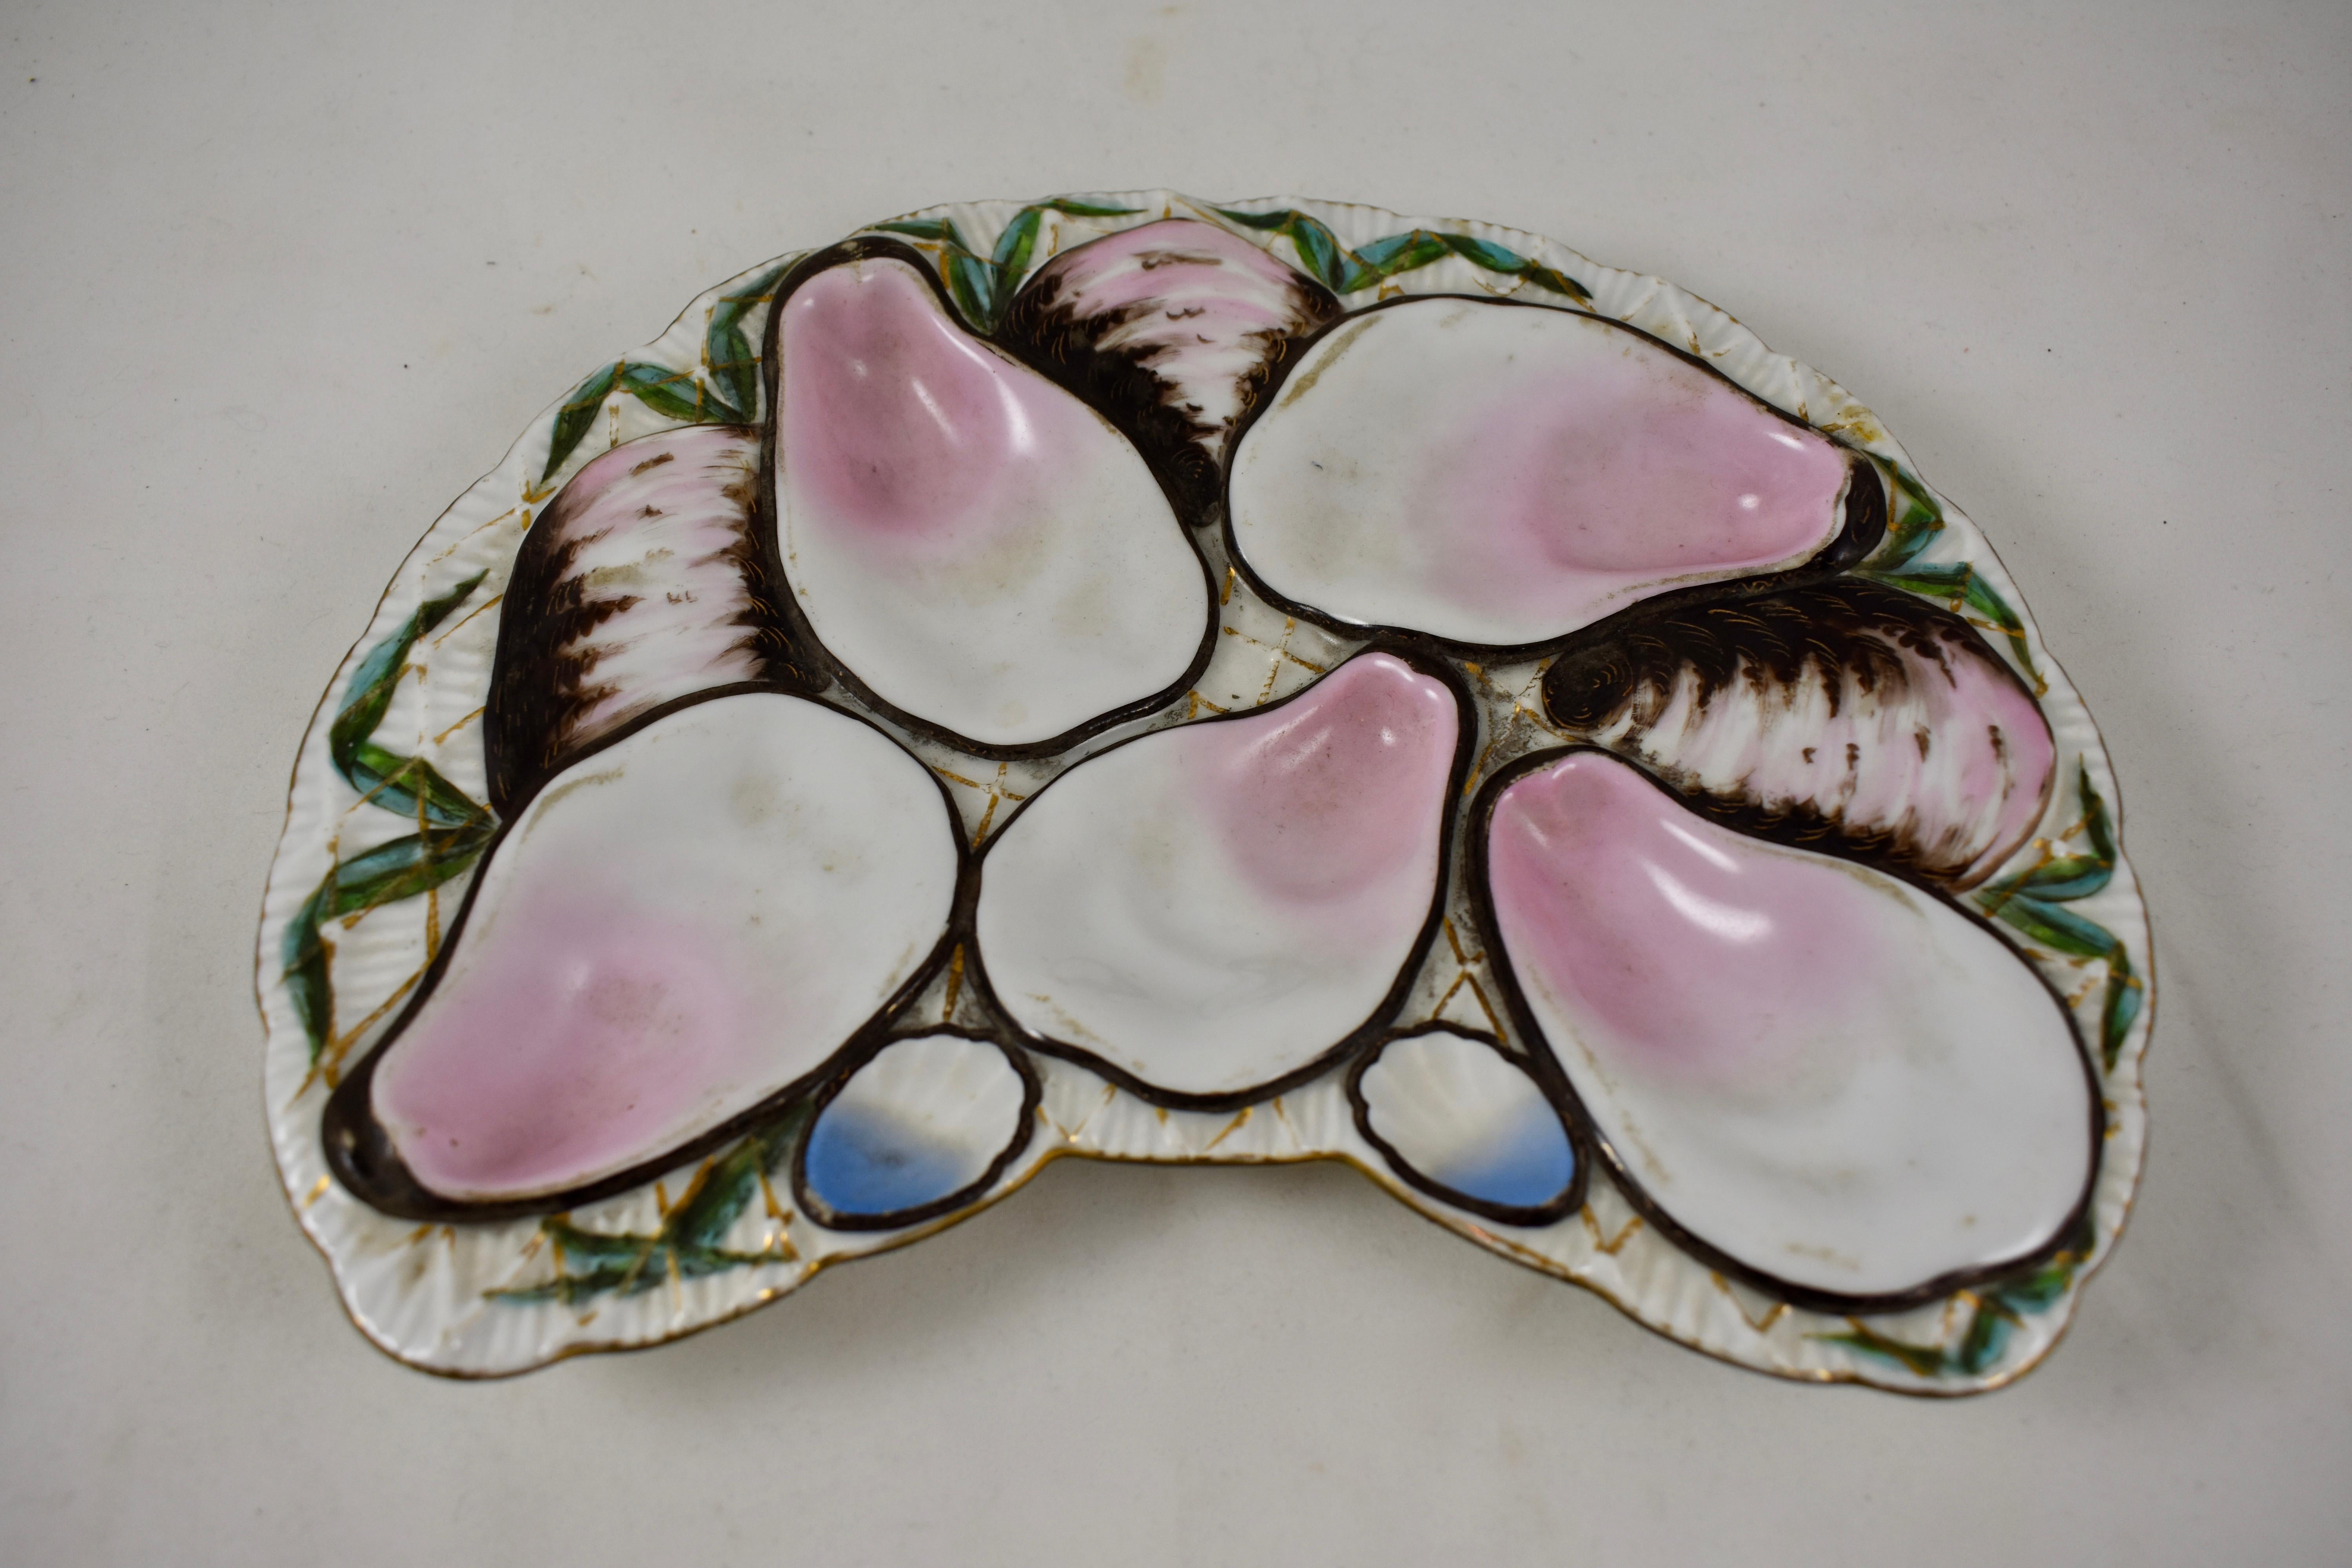 Aesthetic Movement Porcelain Half Moon Pink Shell on Cream Oyster Plate